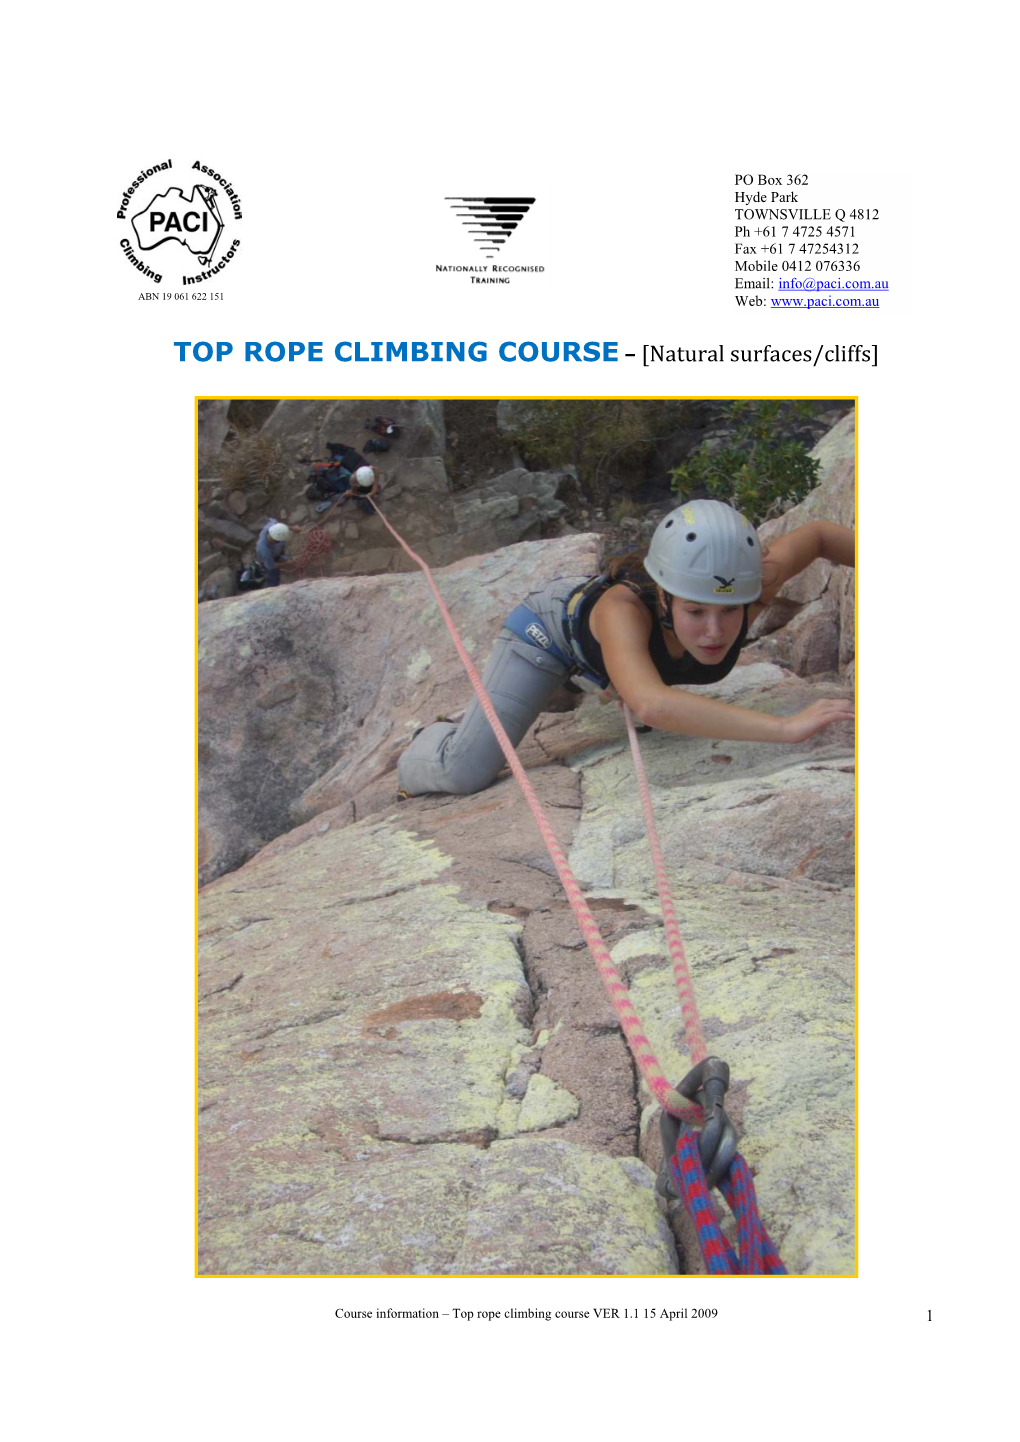 TOP ROPE CLIMBING COURSE – [Natural Surfaces/Cliffs]